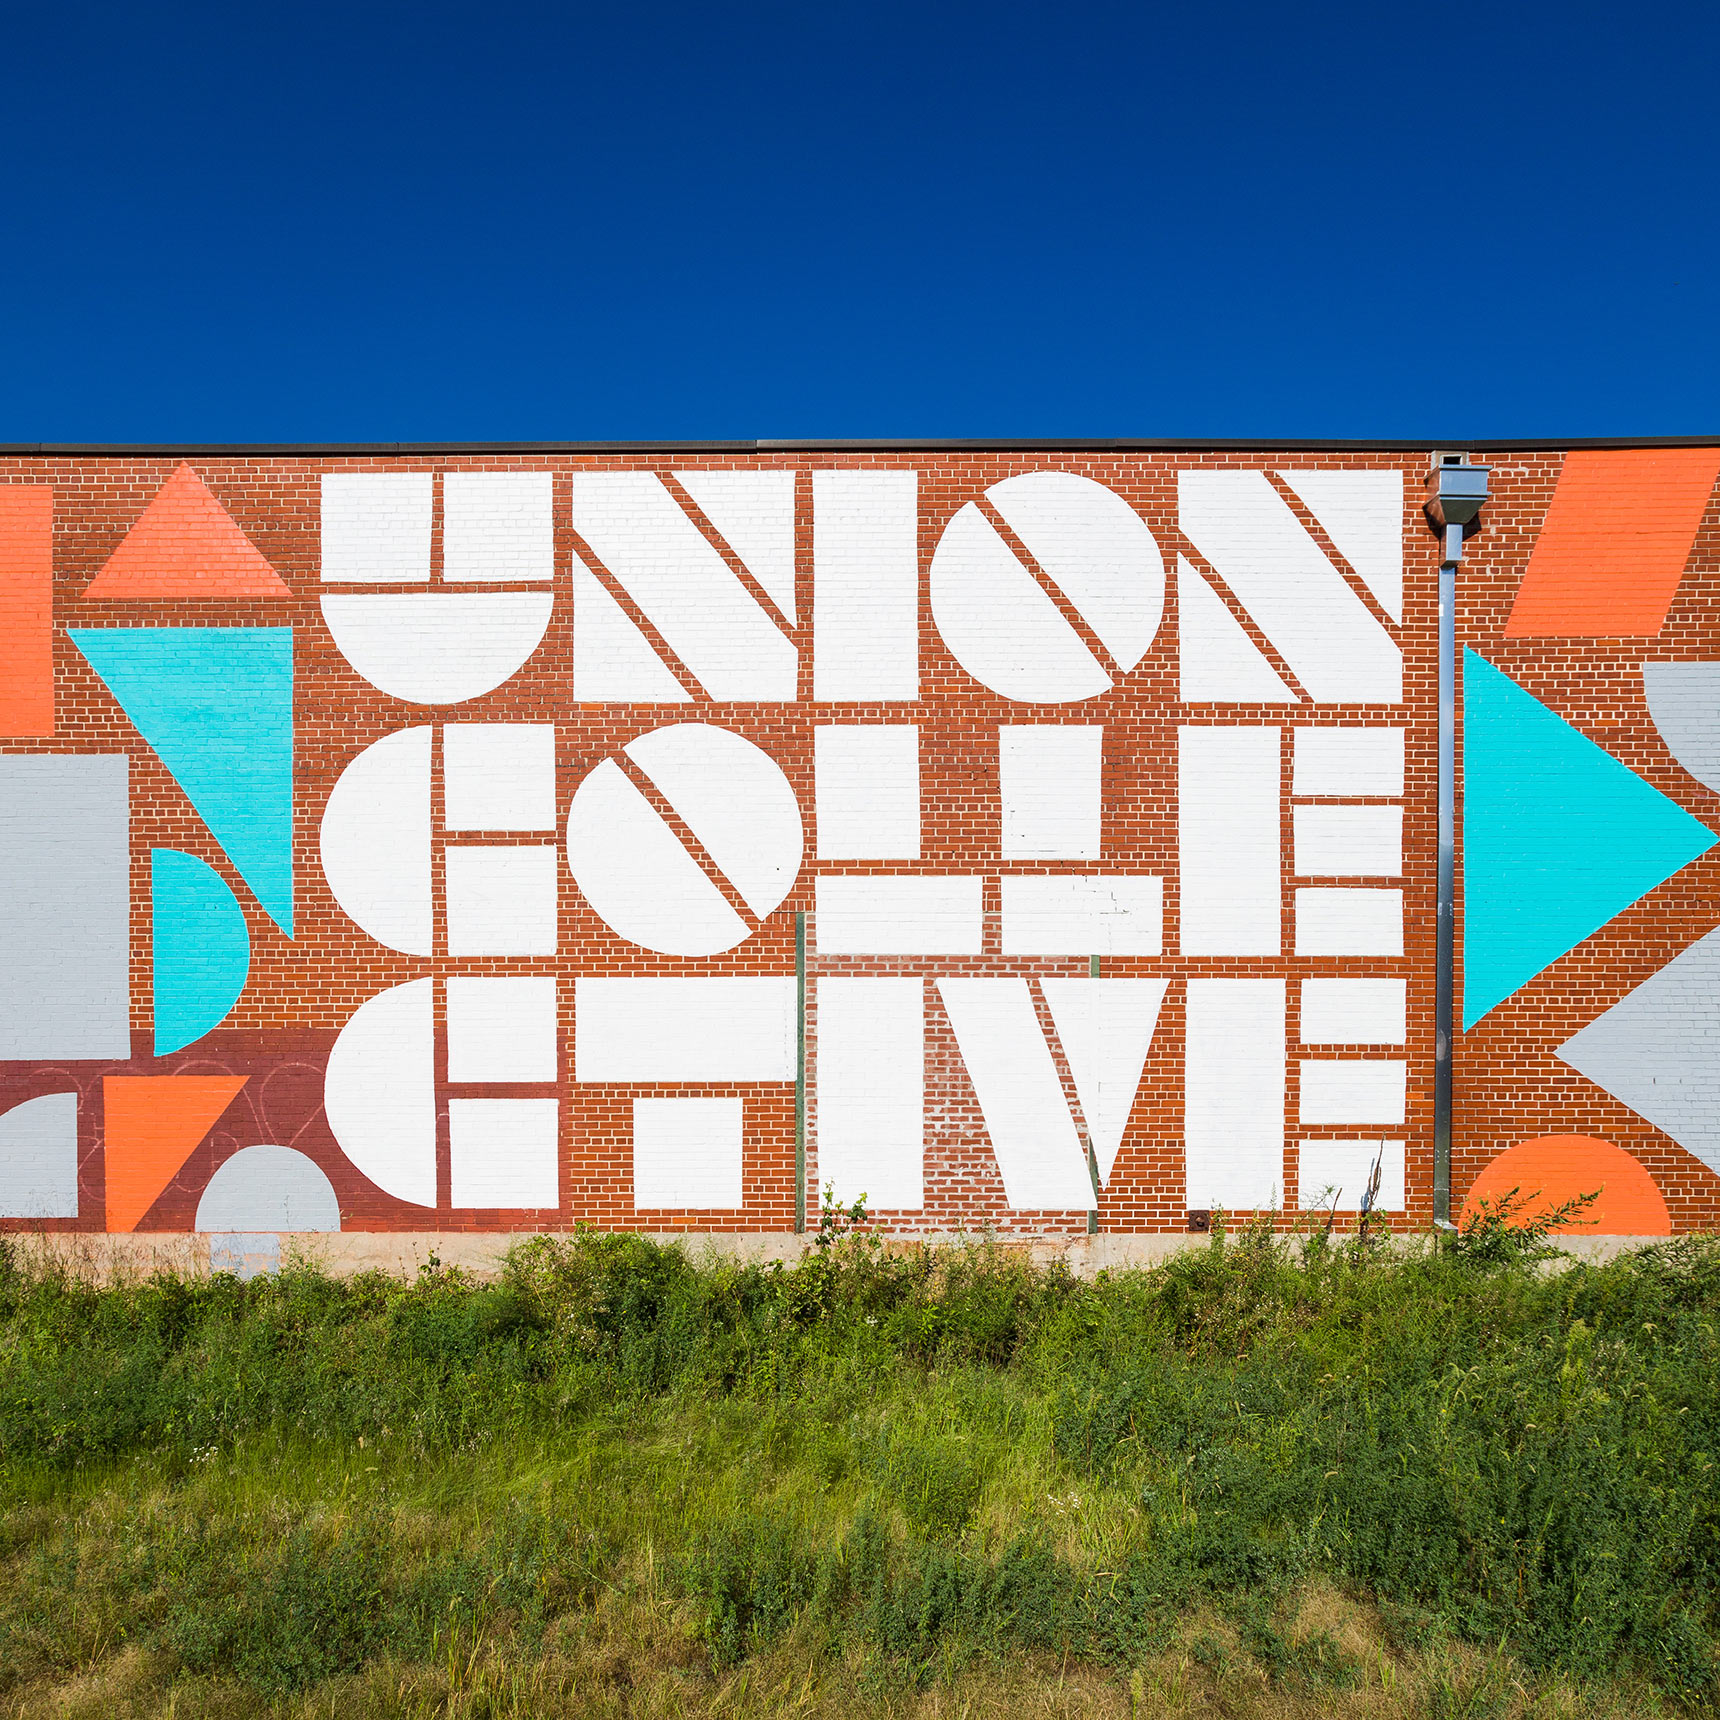 Union Collective geometric stencil logo mural on the side of a warehouse building in baltimore